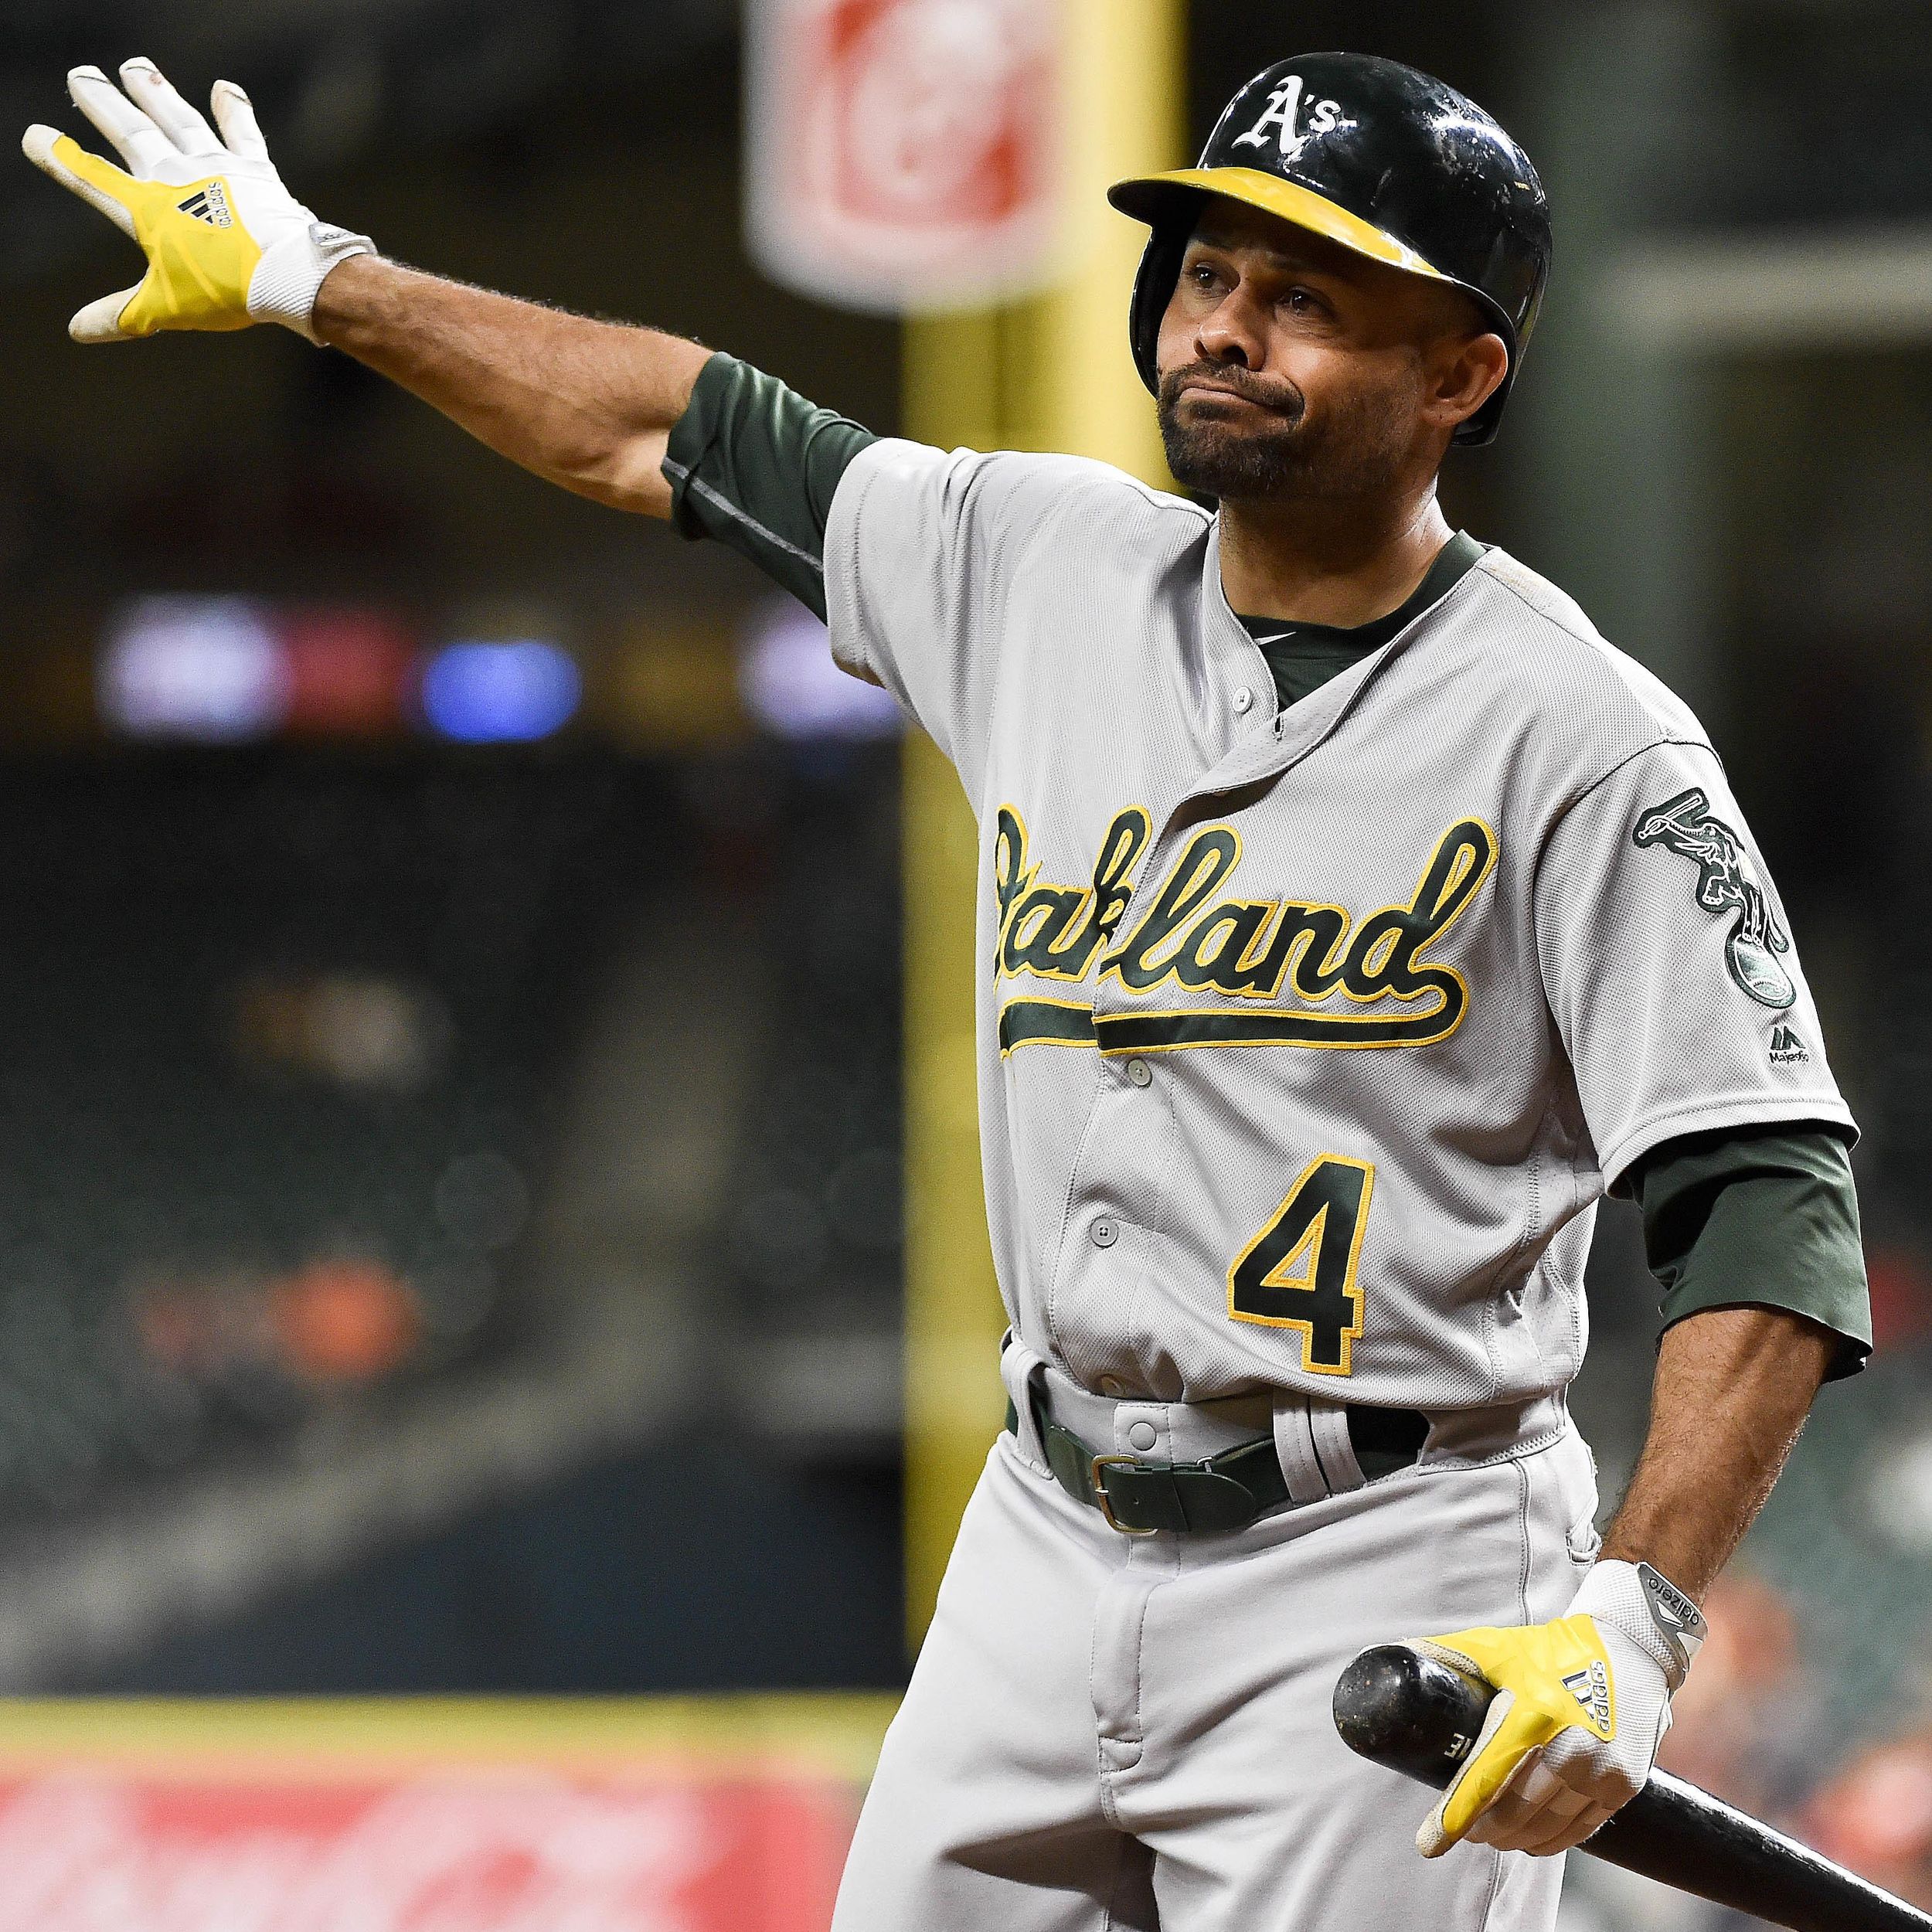 An American baseball center fielder, Coco Crisp has attained immense  popularity due to his peculiar hair style.